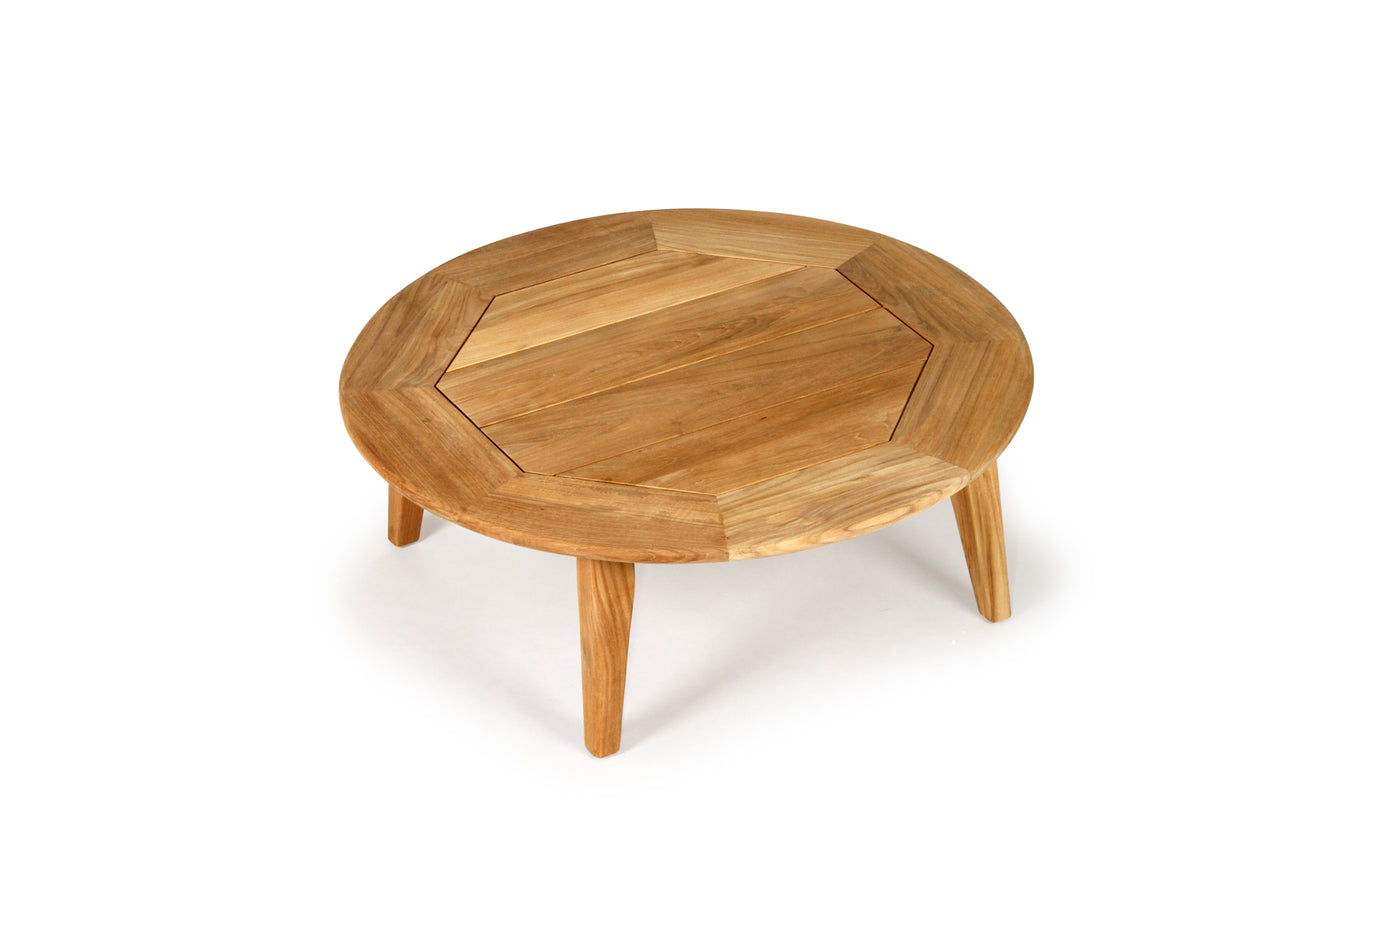 Manny Outdoor Coffee Table - Round